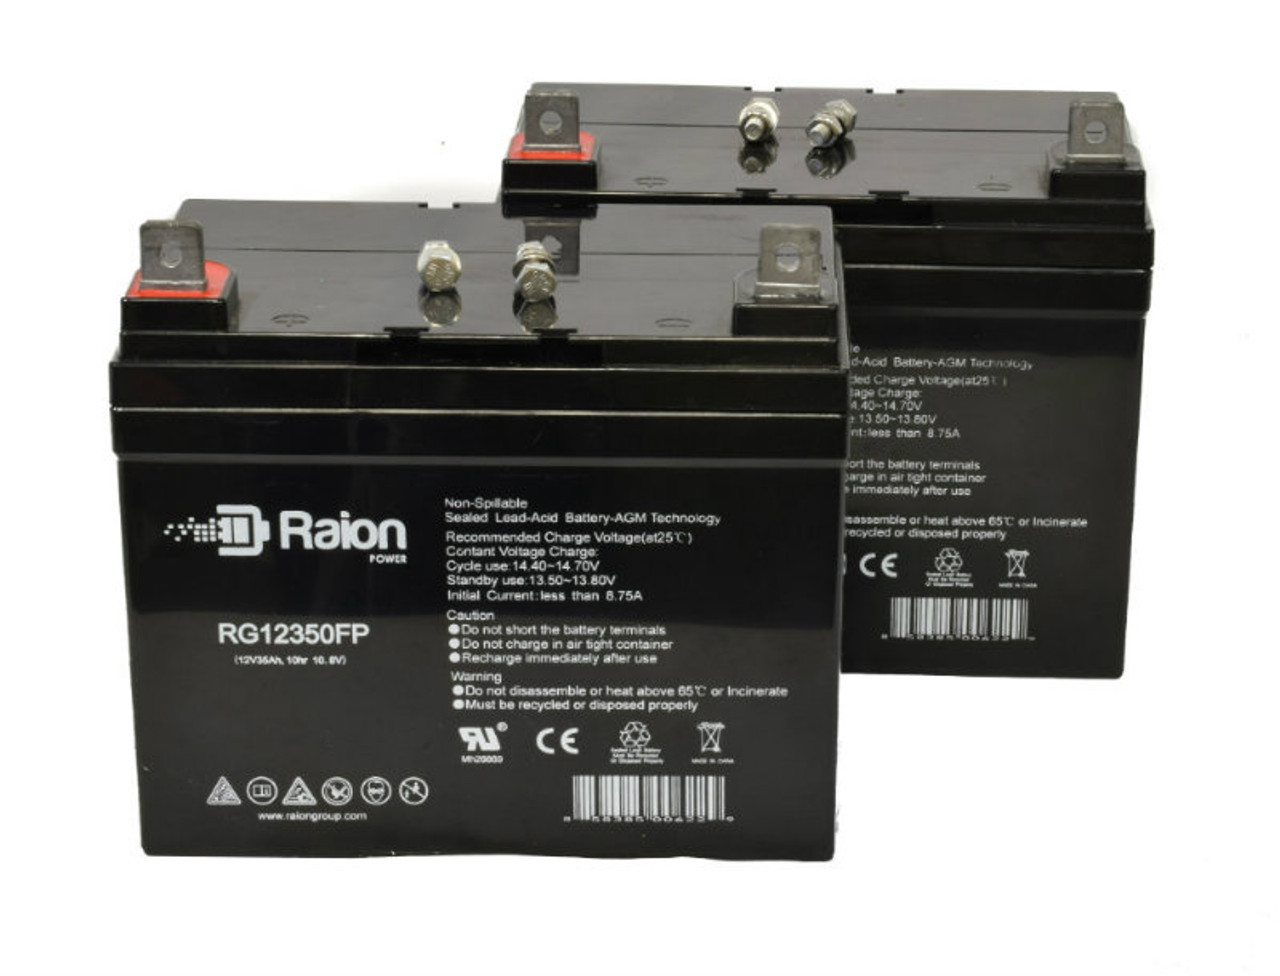 Raion Power Replacement 12V 35Ah Lawn Mower Battery for JC Penney 931-2703 - 2 Pack